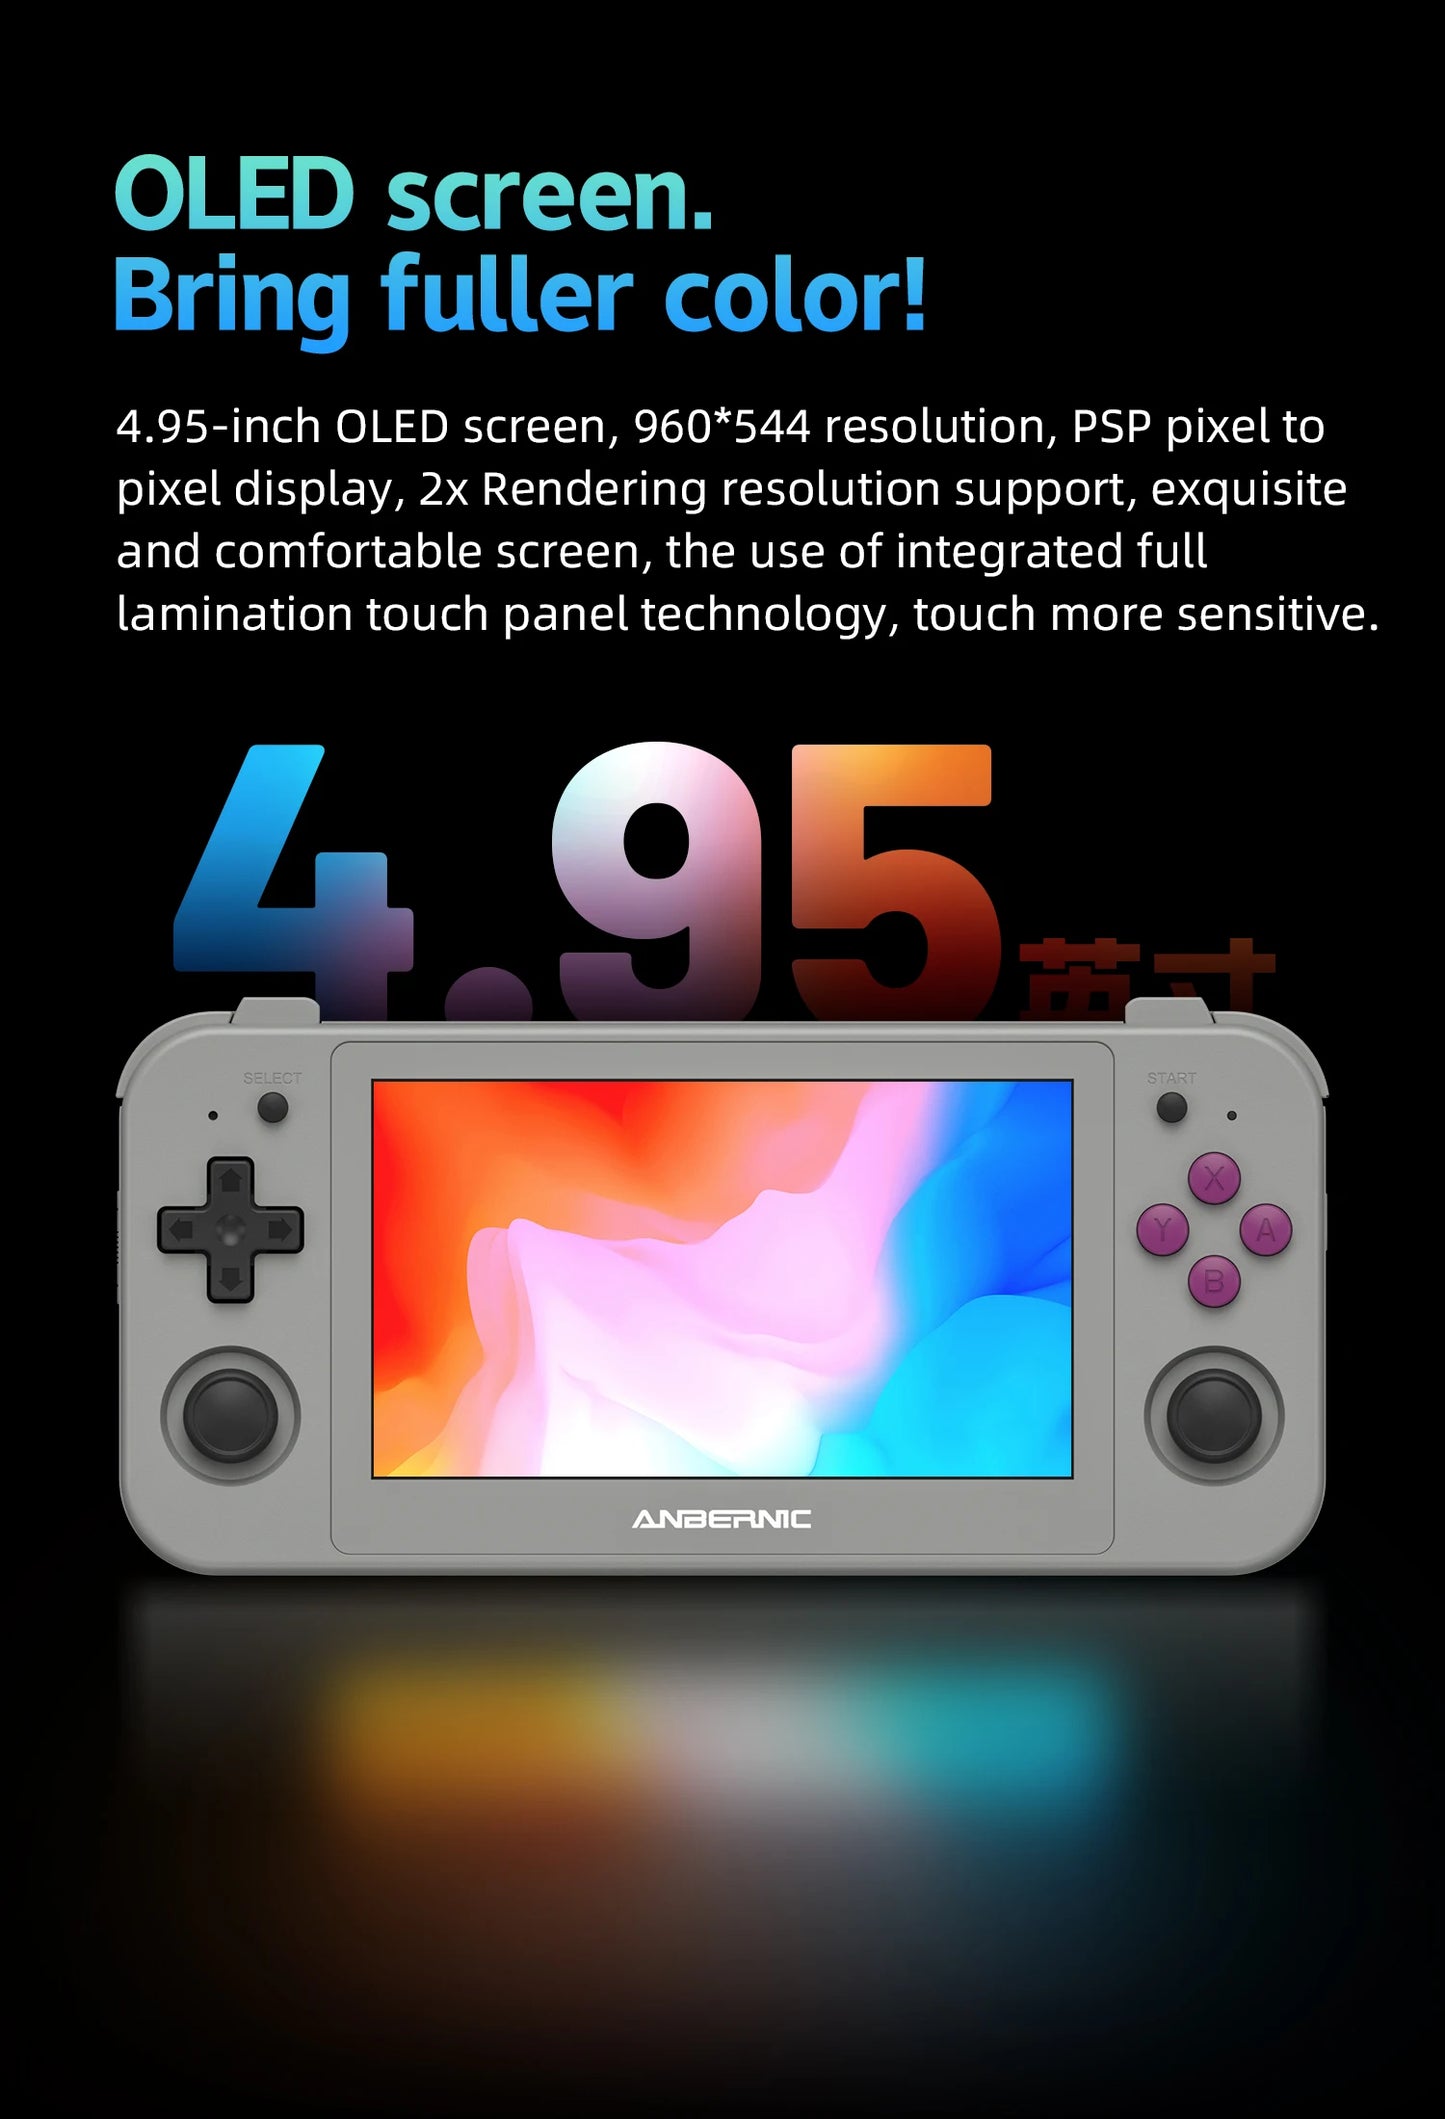 ANBERNIC RG505 | 4.95" OLED Touch 960x544 | Retro Handheld Game Console